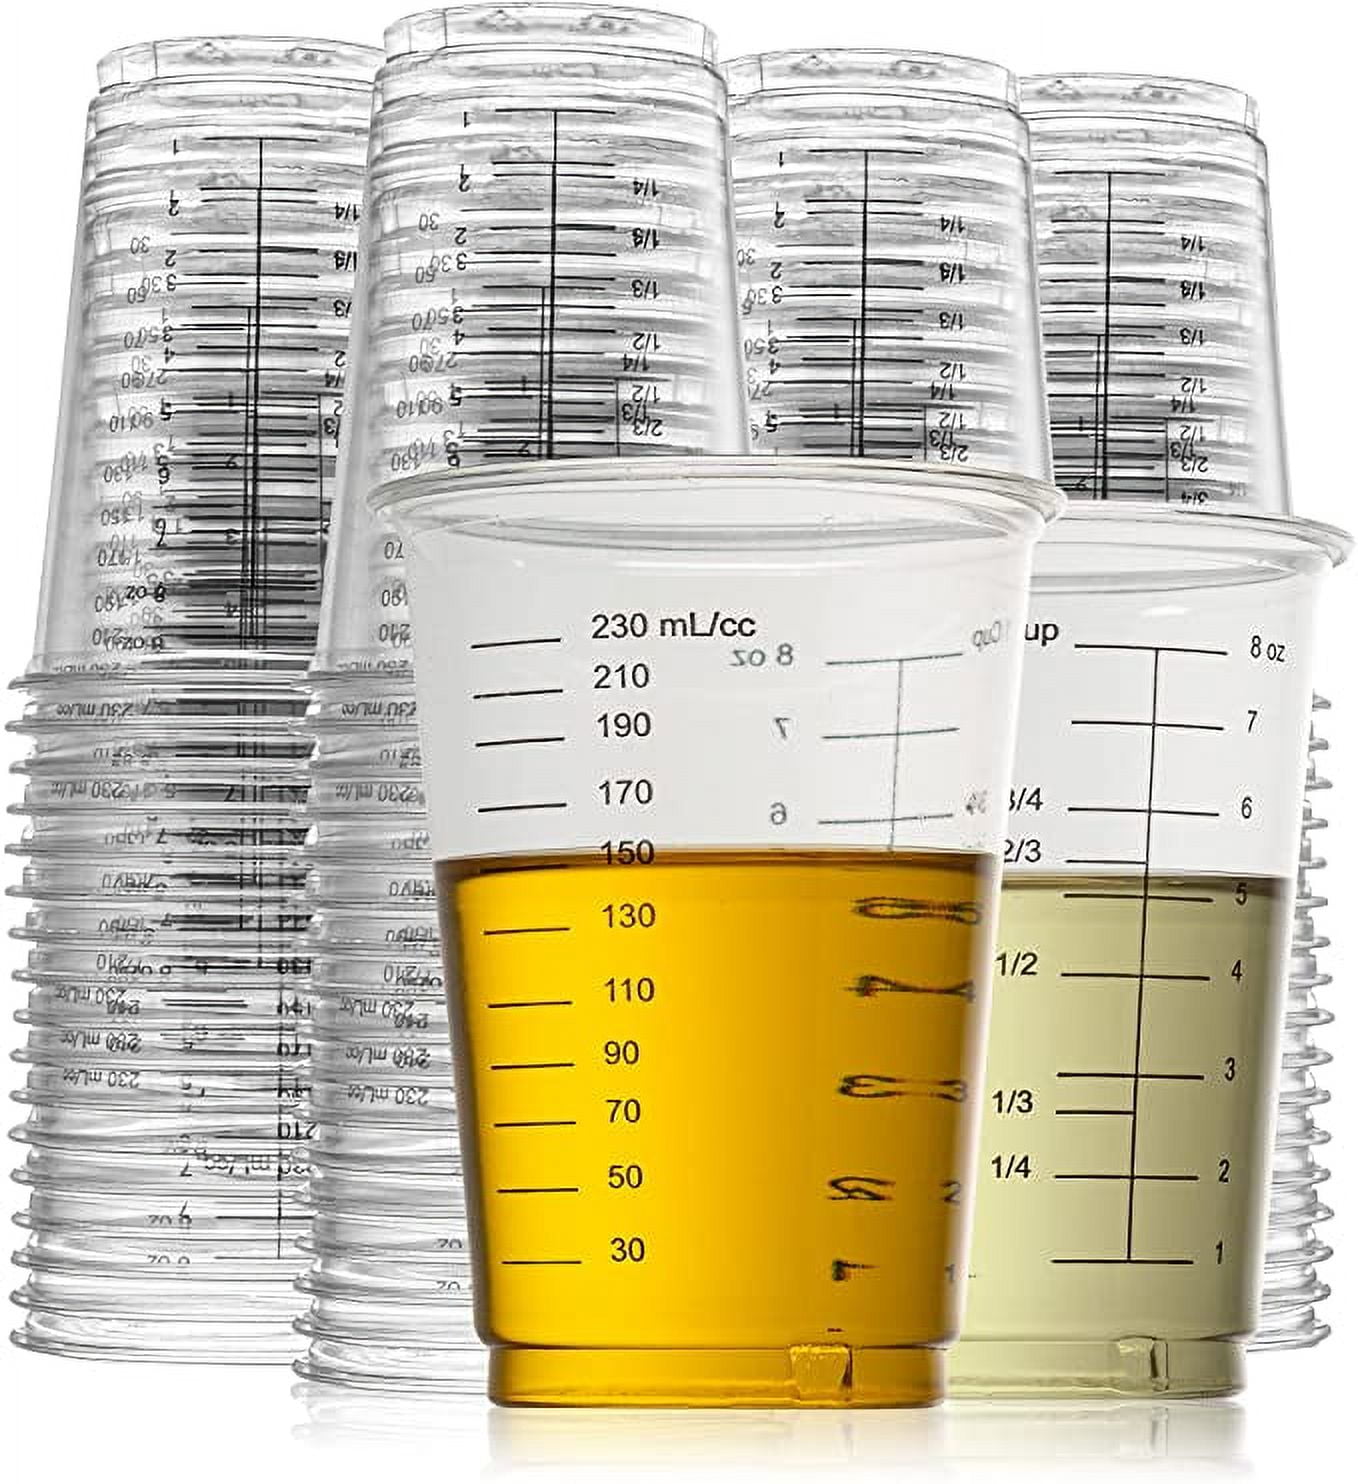 1-cup Silicone Measuring Cup - Flexible - 3 1/2 x 2 1/2 x 4 1/2 - 1  count box